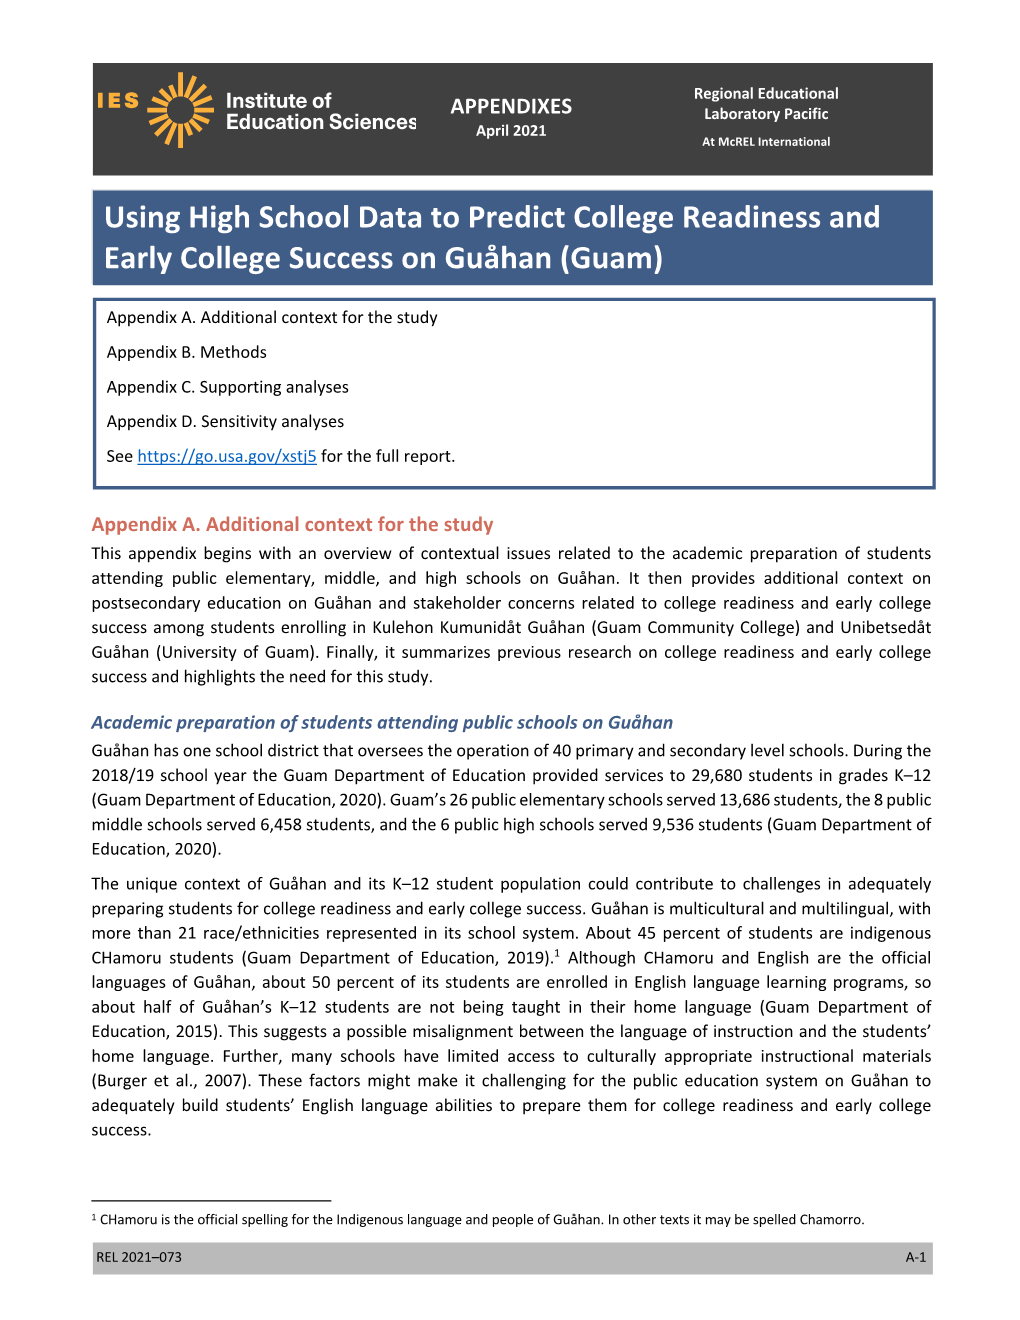 Using High School Data to Predict College Readiness and Early College Success on Guåhan (Guam)